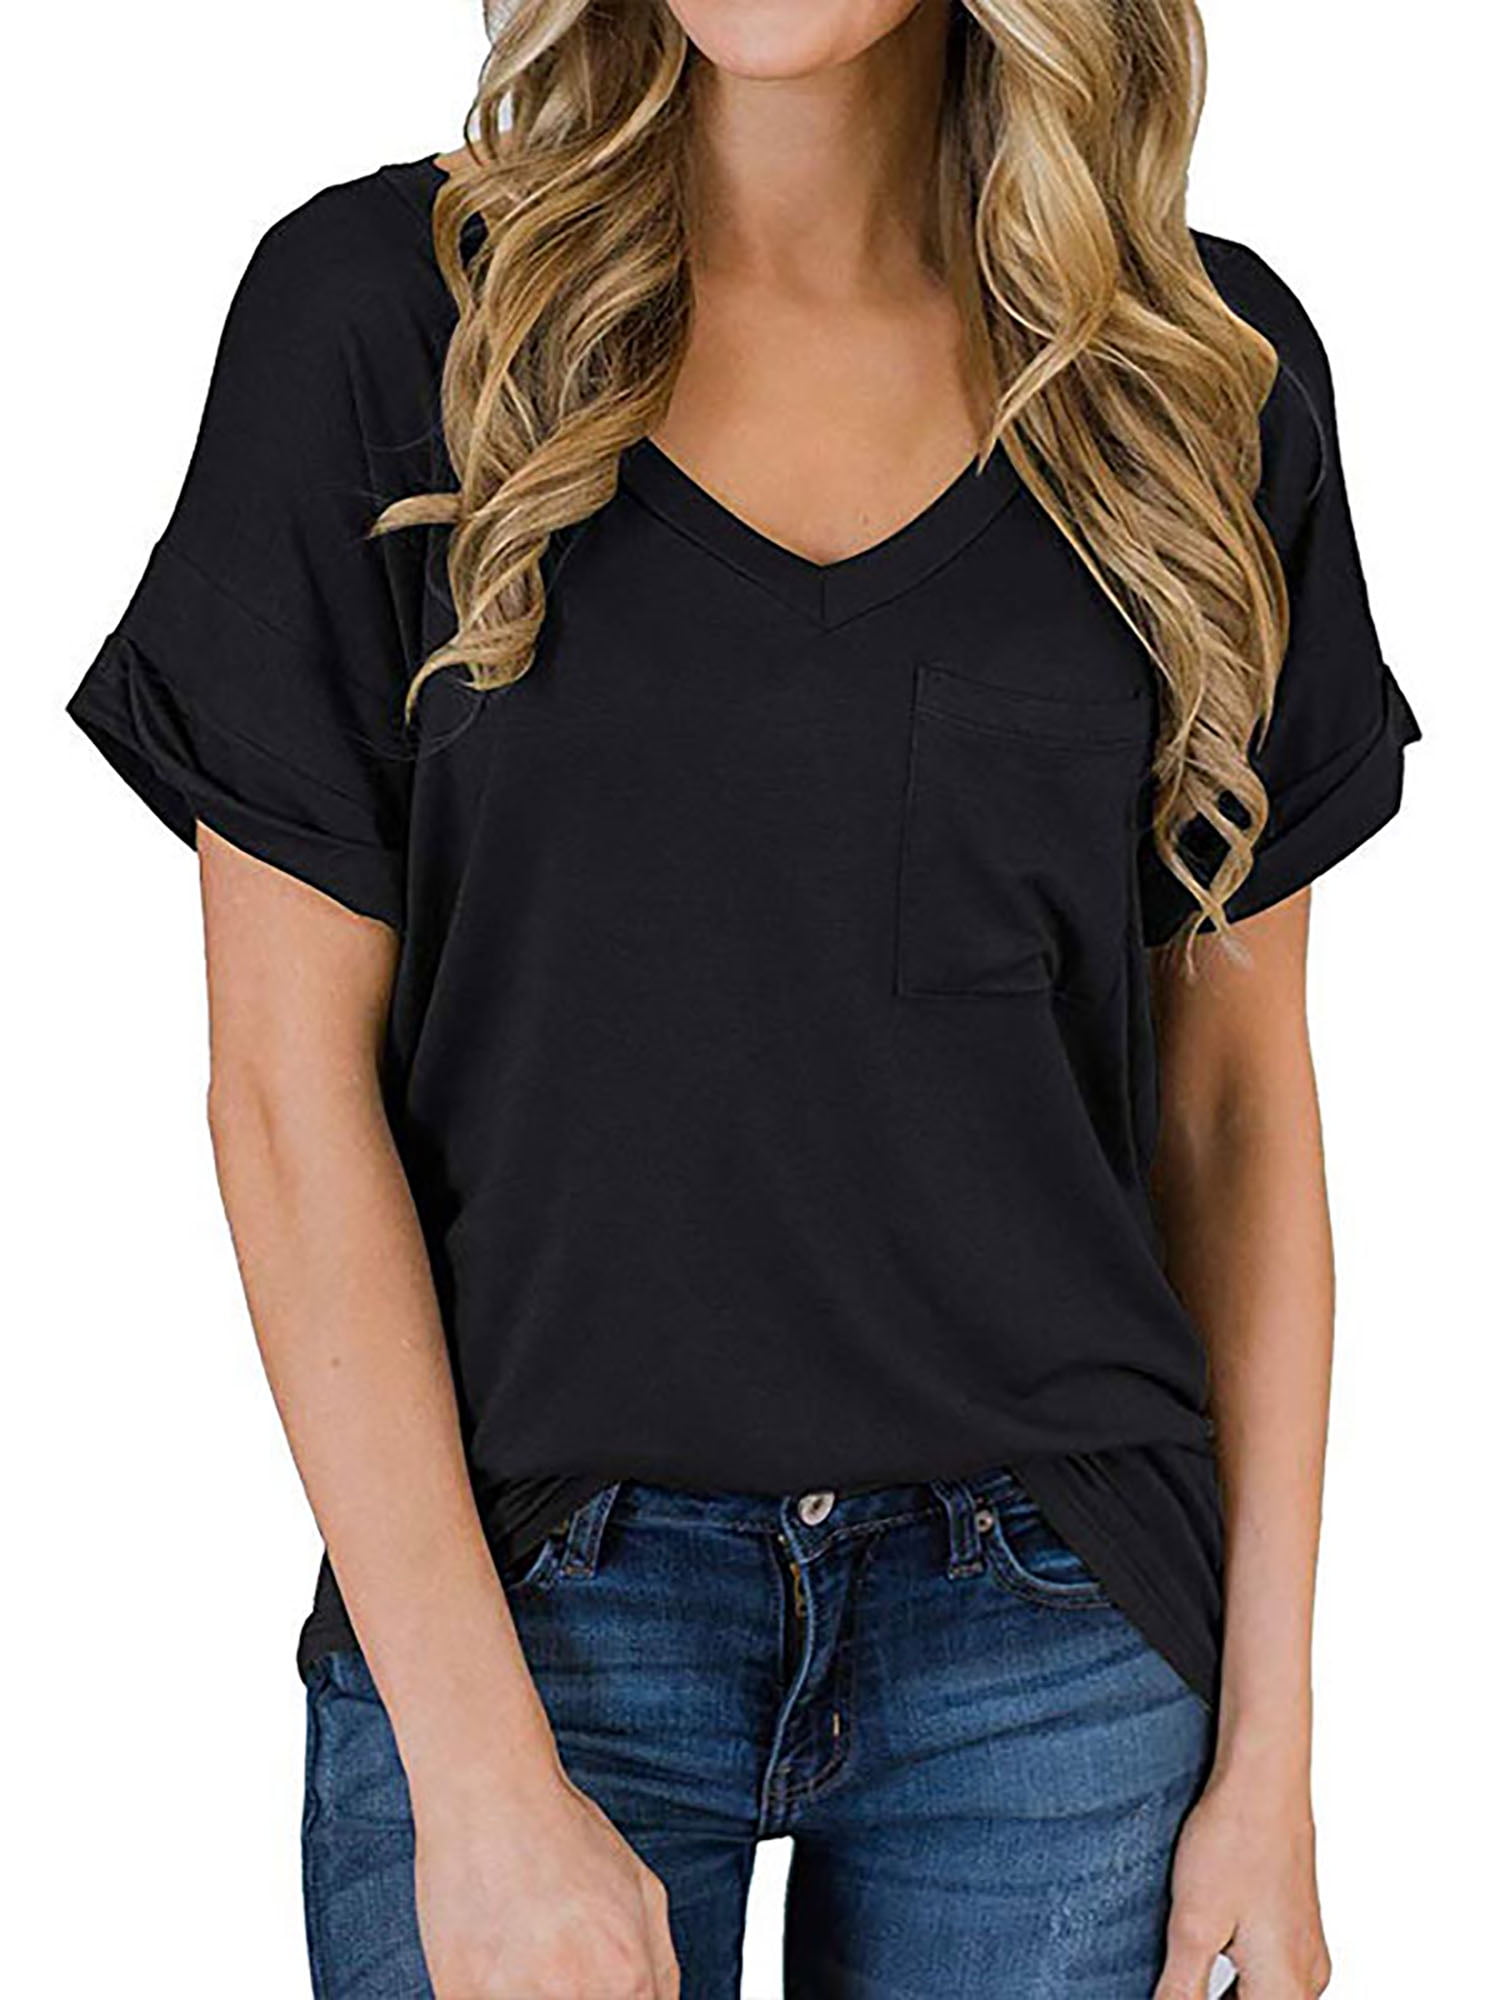 Womens Tops V Neck Tee Casual Short Sleeve and Long Sleeve T Shirts